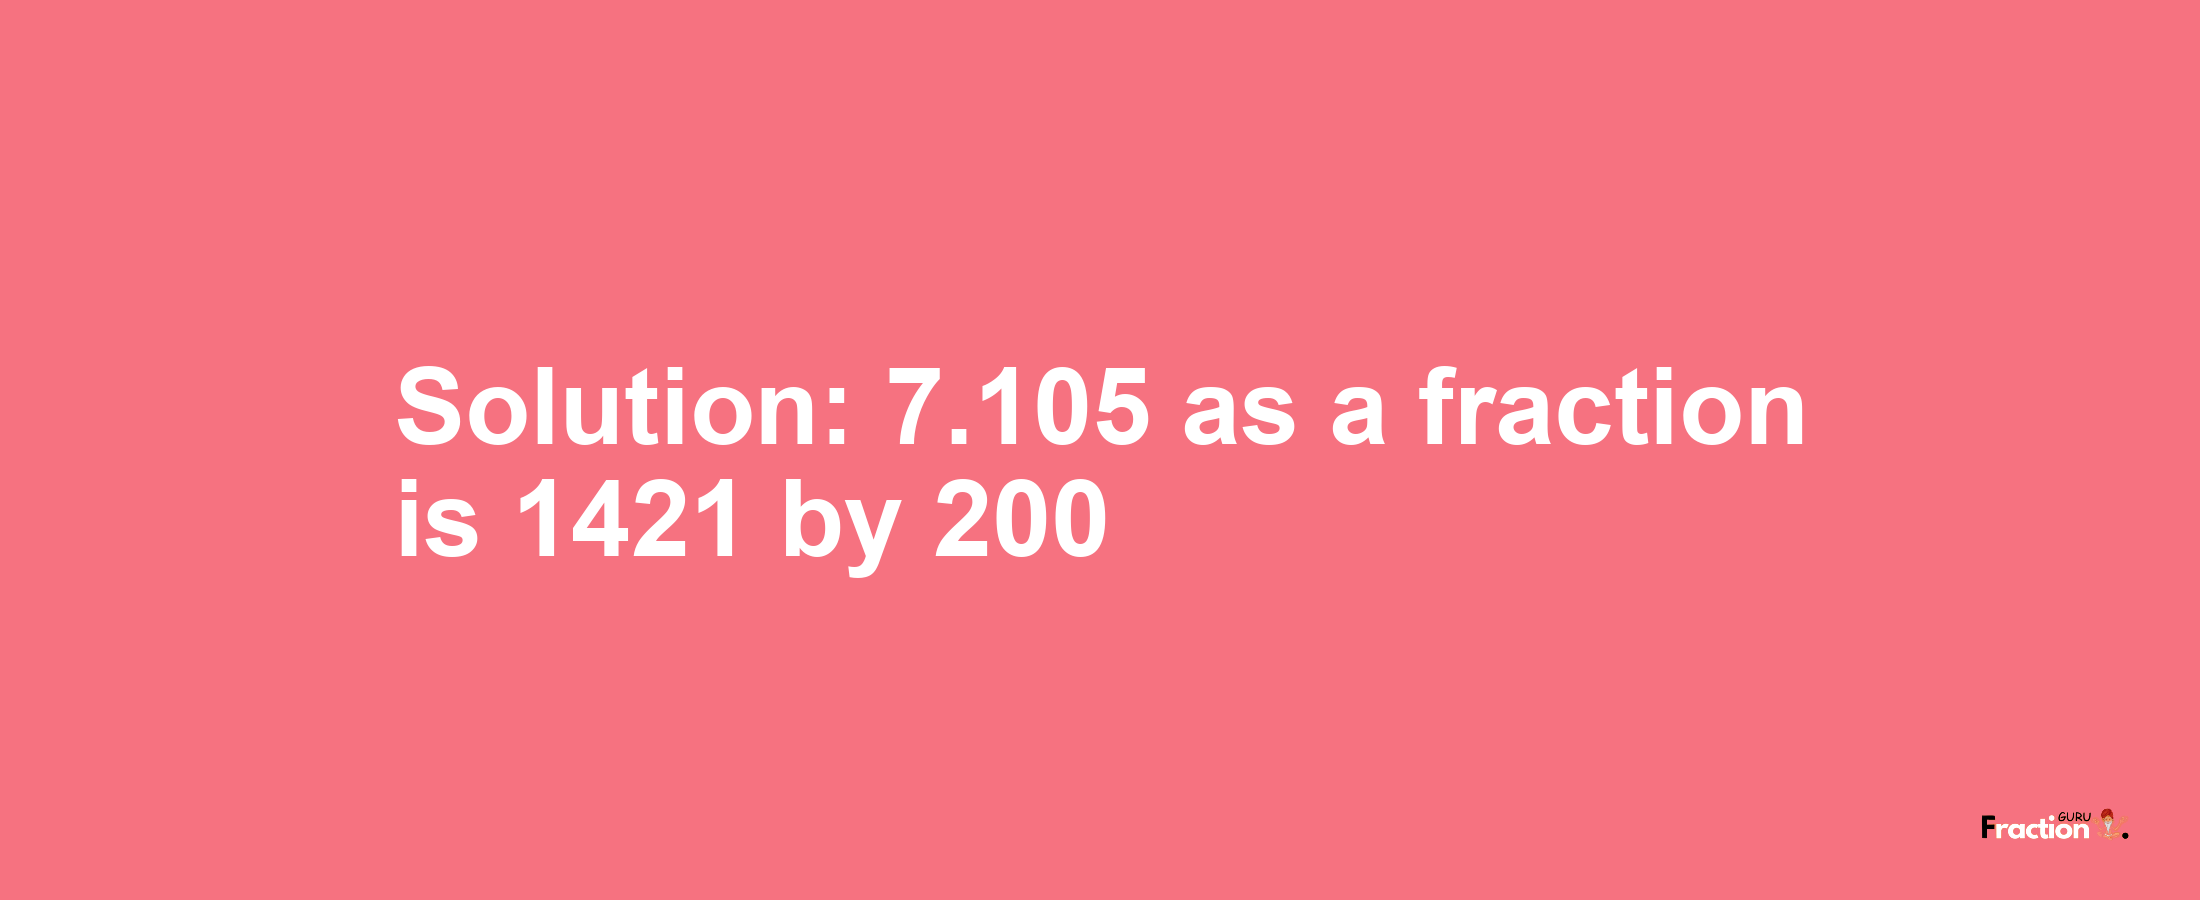 Solution:7.105 as a fraction is 1421/200